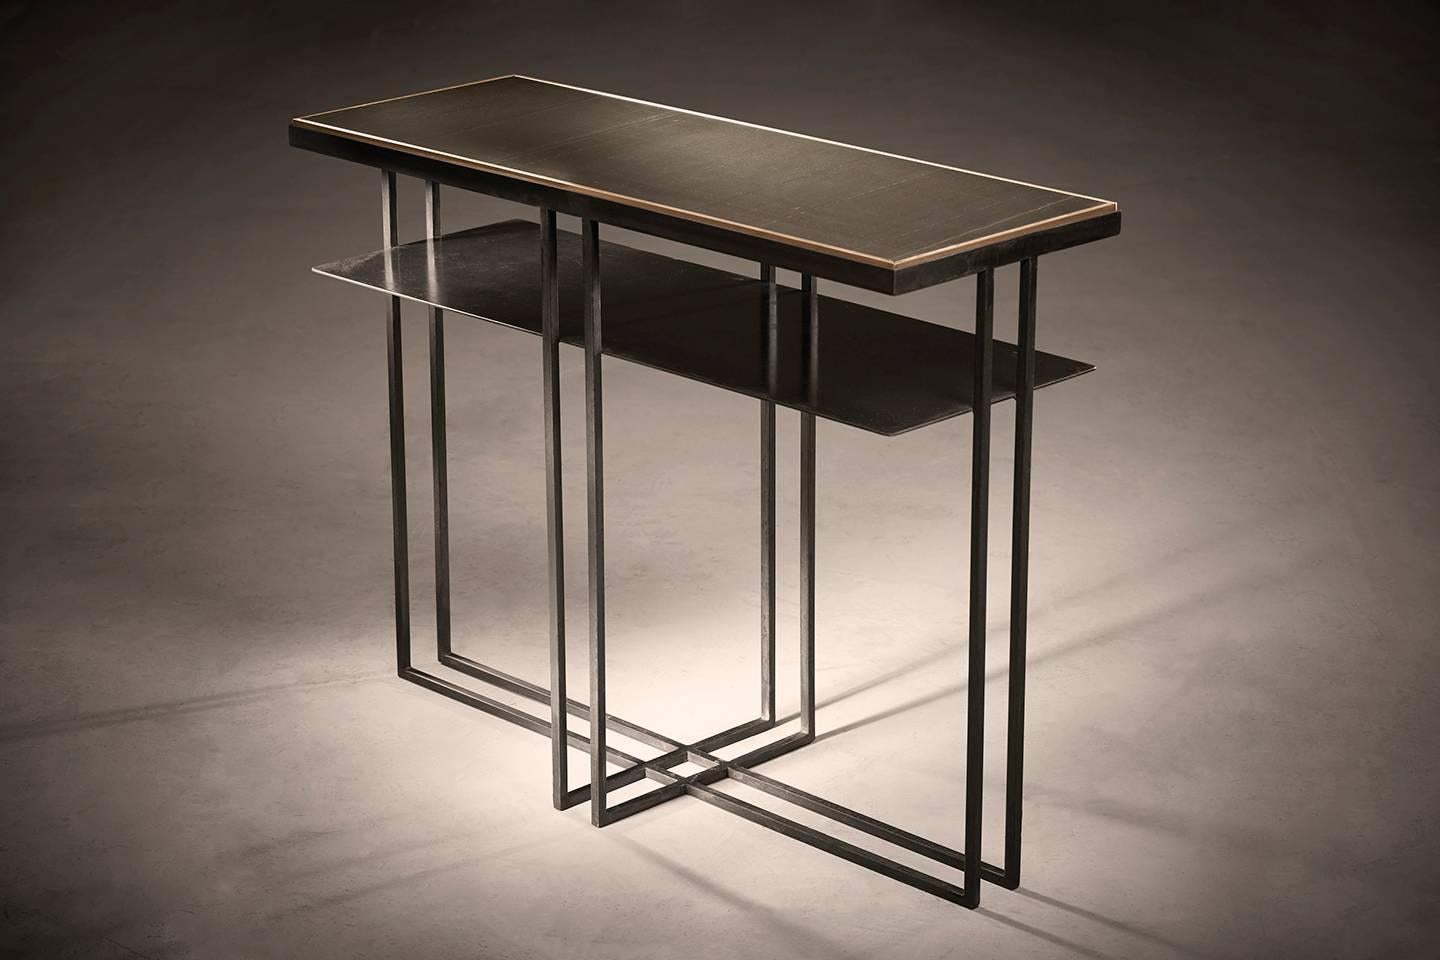 A console table in blackened steel and honed Cumbrian slate, with a polished brass trim. Hand crafted to order in the North. Bespoke finishes and sizes are available.

Measures: 150cm (length) x 30cm (width) x 80cm (height).
Custom sizes